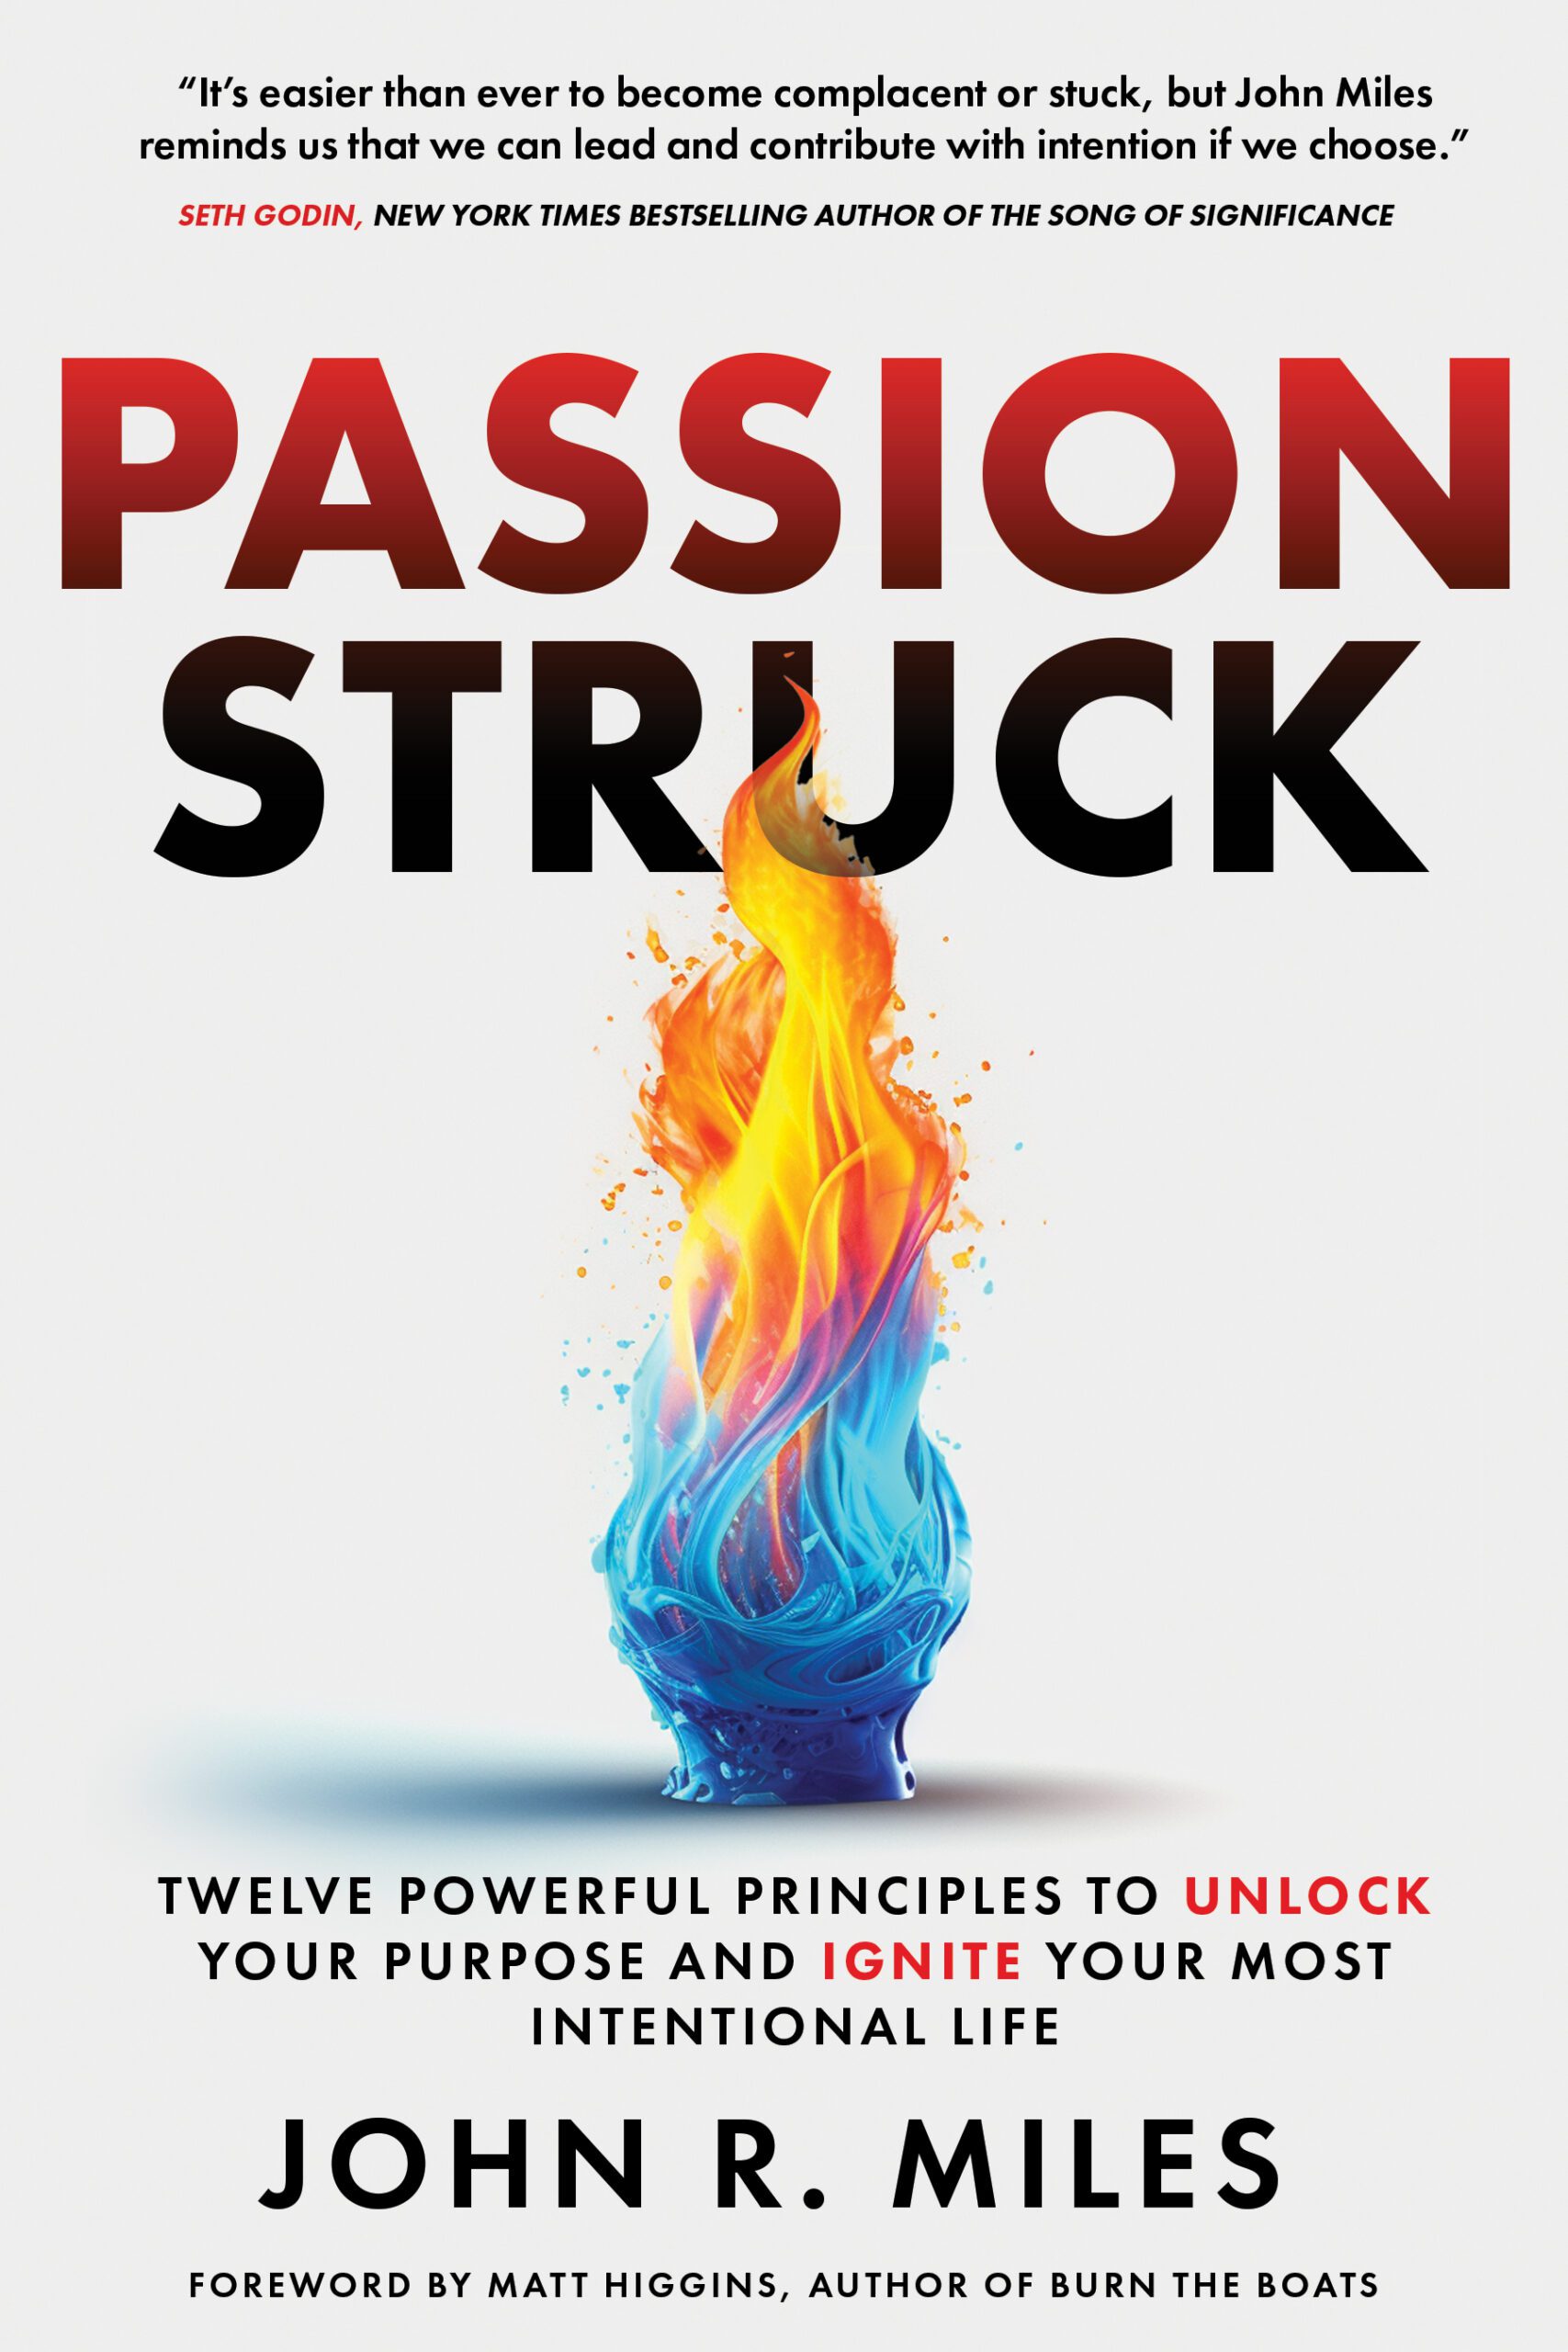 Passion Struck: Twelve Powerful Principles to Unlock Your Purpose and Ignite Your Most Powerful Life by John R. Miles